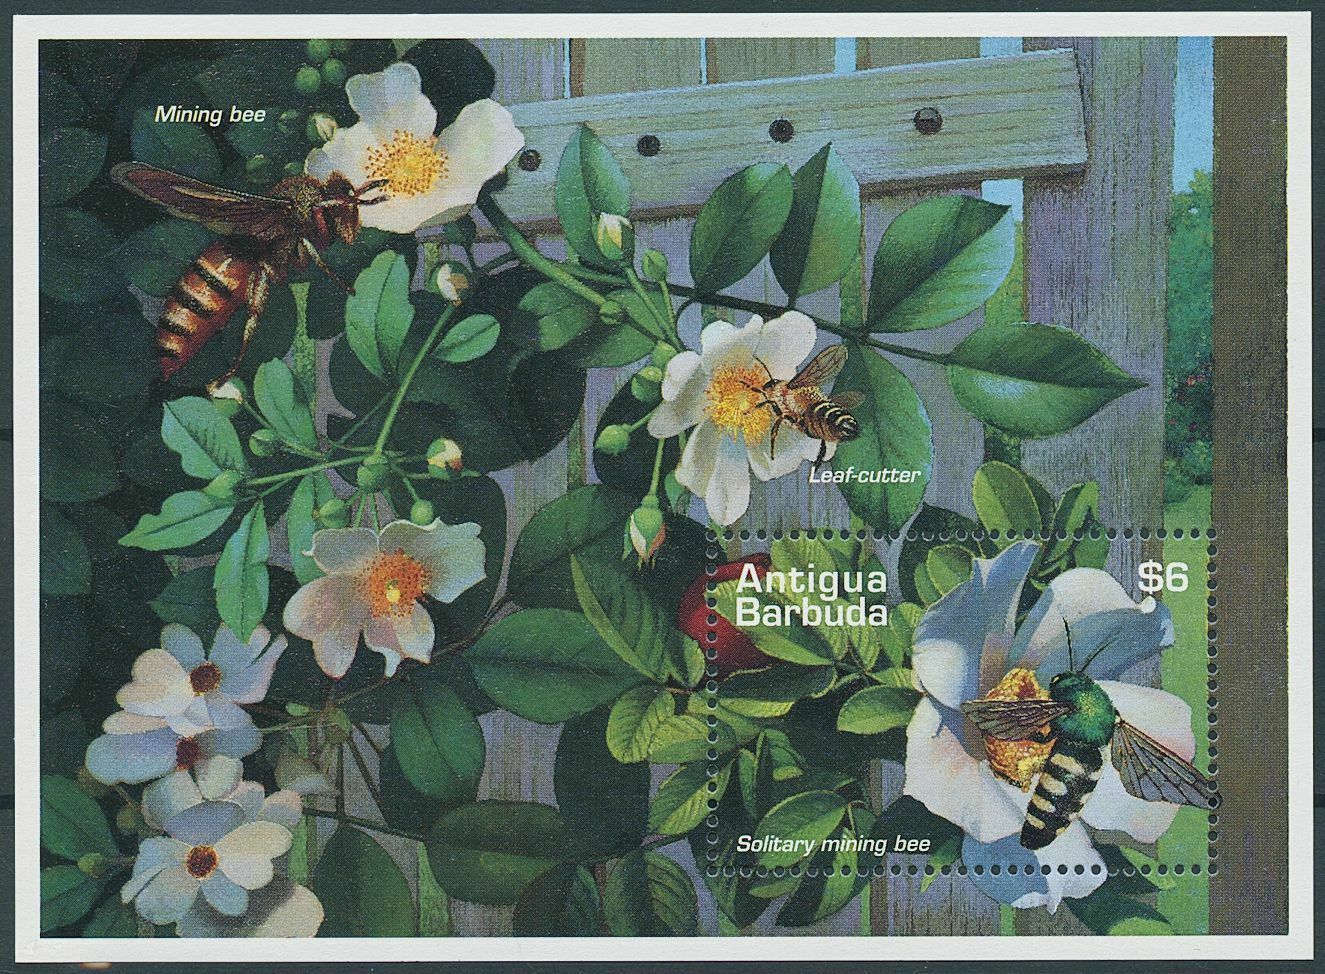 Antigua & Barbuda 1995 MNH Bees Stamps Solitary Mining Bee Insects 1v S/S